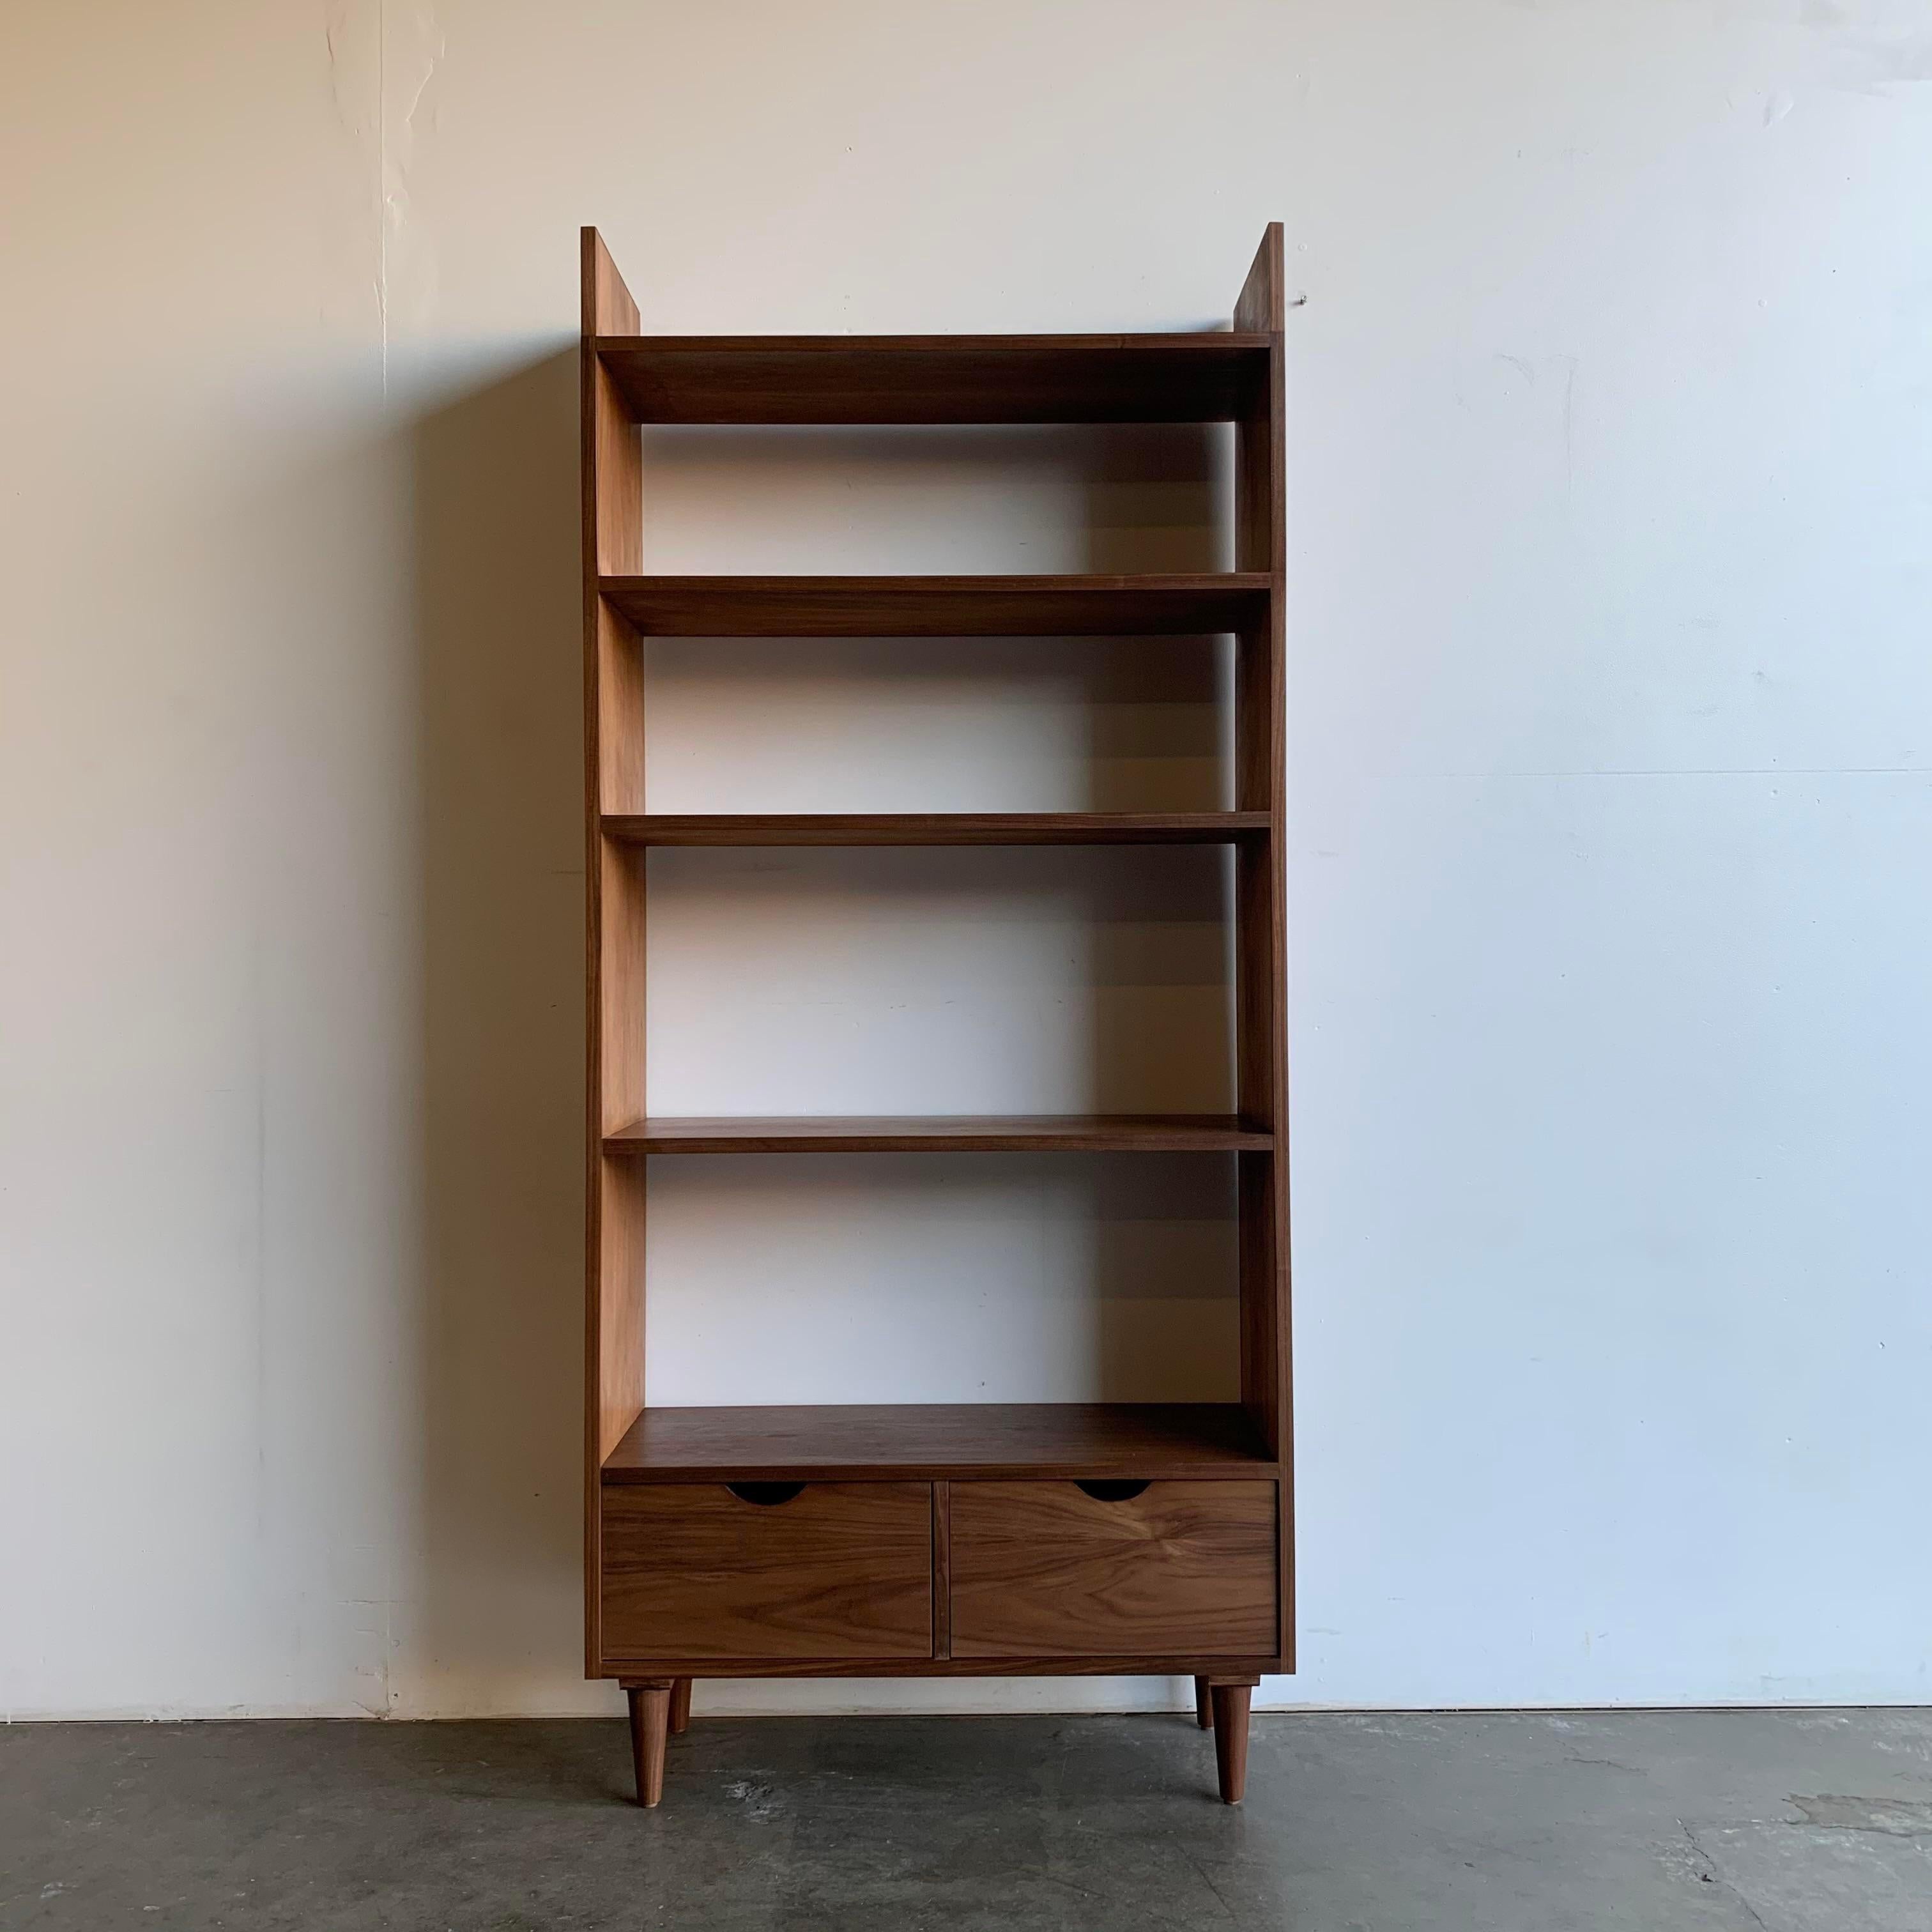 Handcrafted in house for a staging project. Item offers a clean minimal design, extended top for added storage and two drawers for closed storage. Made in solid and walnut veneer.